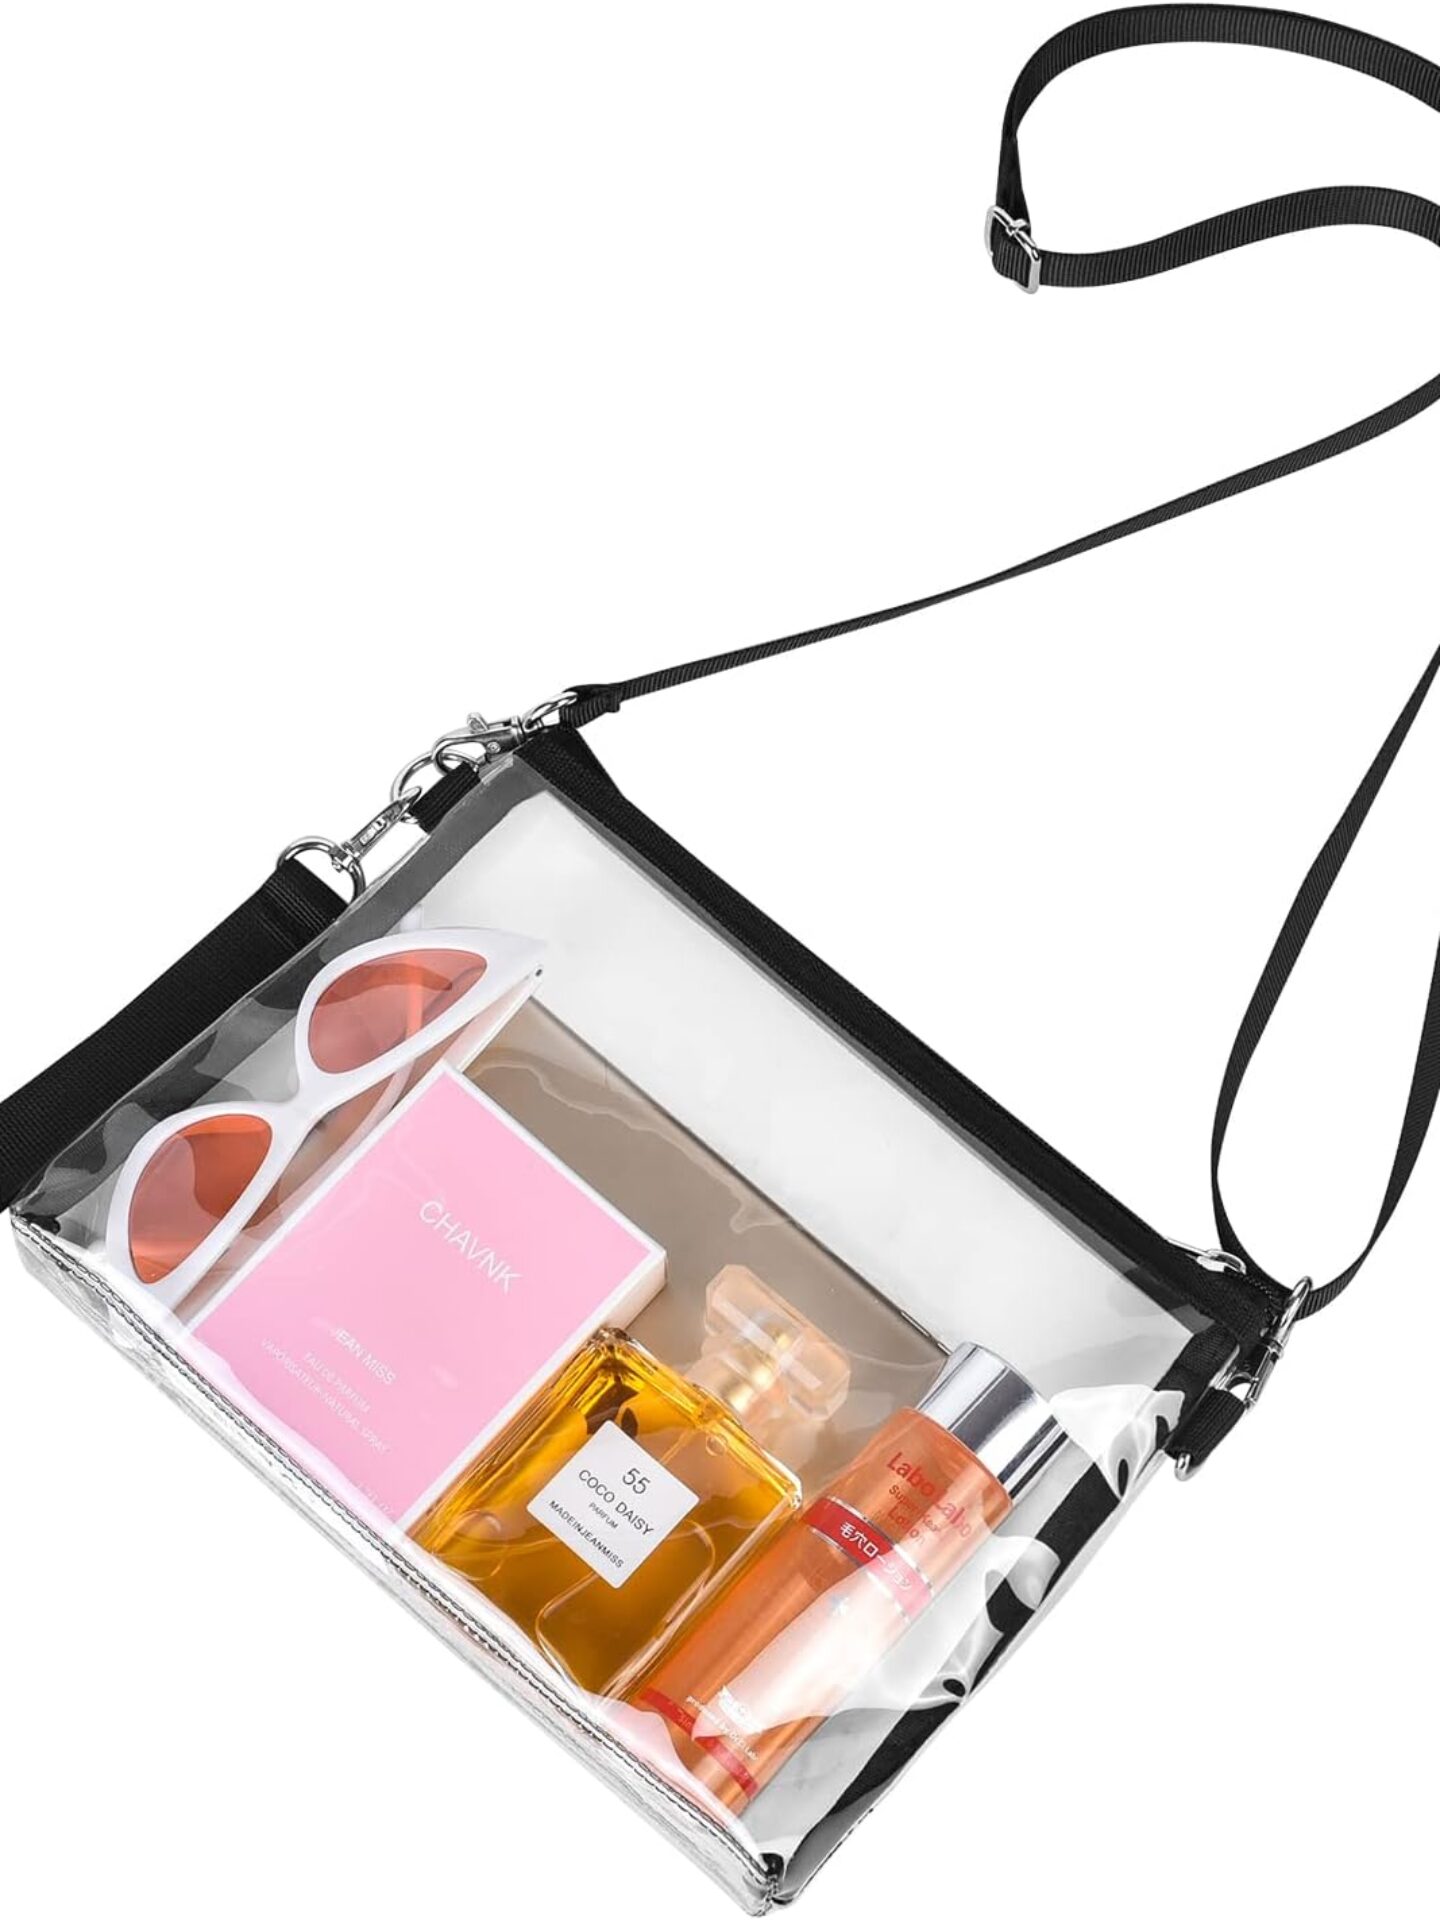 The Best Clear Bags To Have For Your Next Concert - Girls United